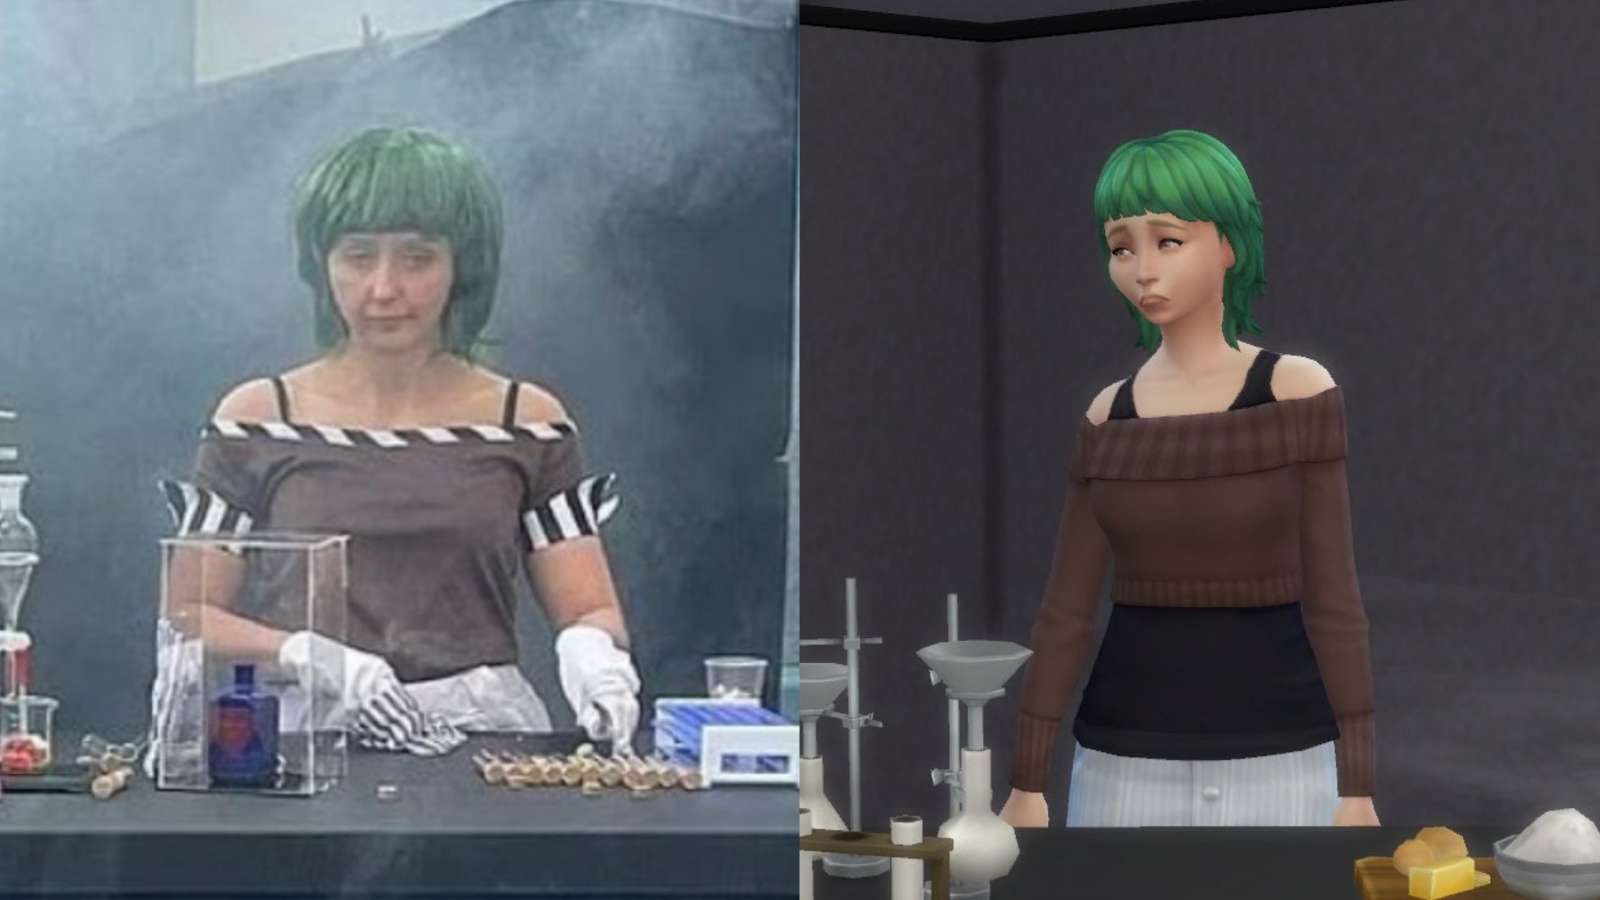 Willy Wonka event recreated in The SIms 4.